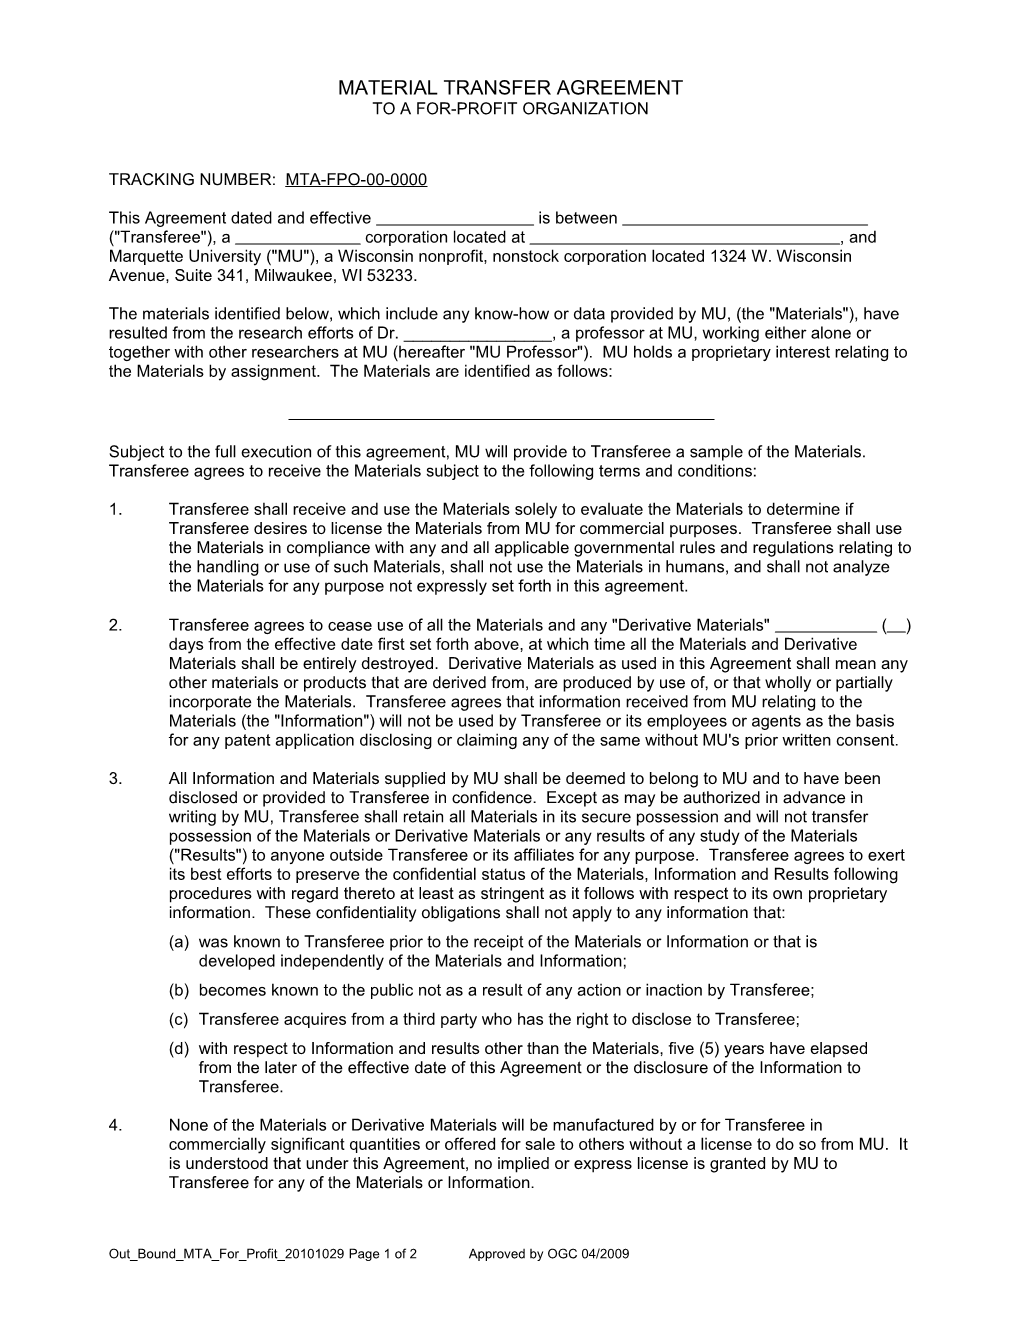 This Agreement Dated and Effective ______ Is Between ______ ( Transferee , a ______ Corporation